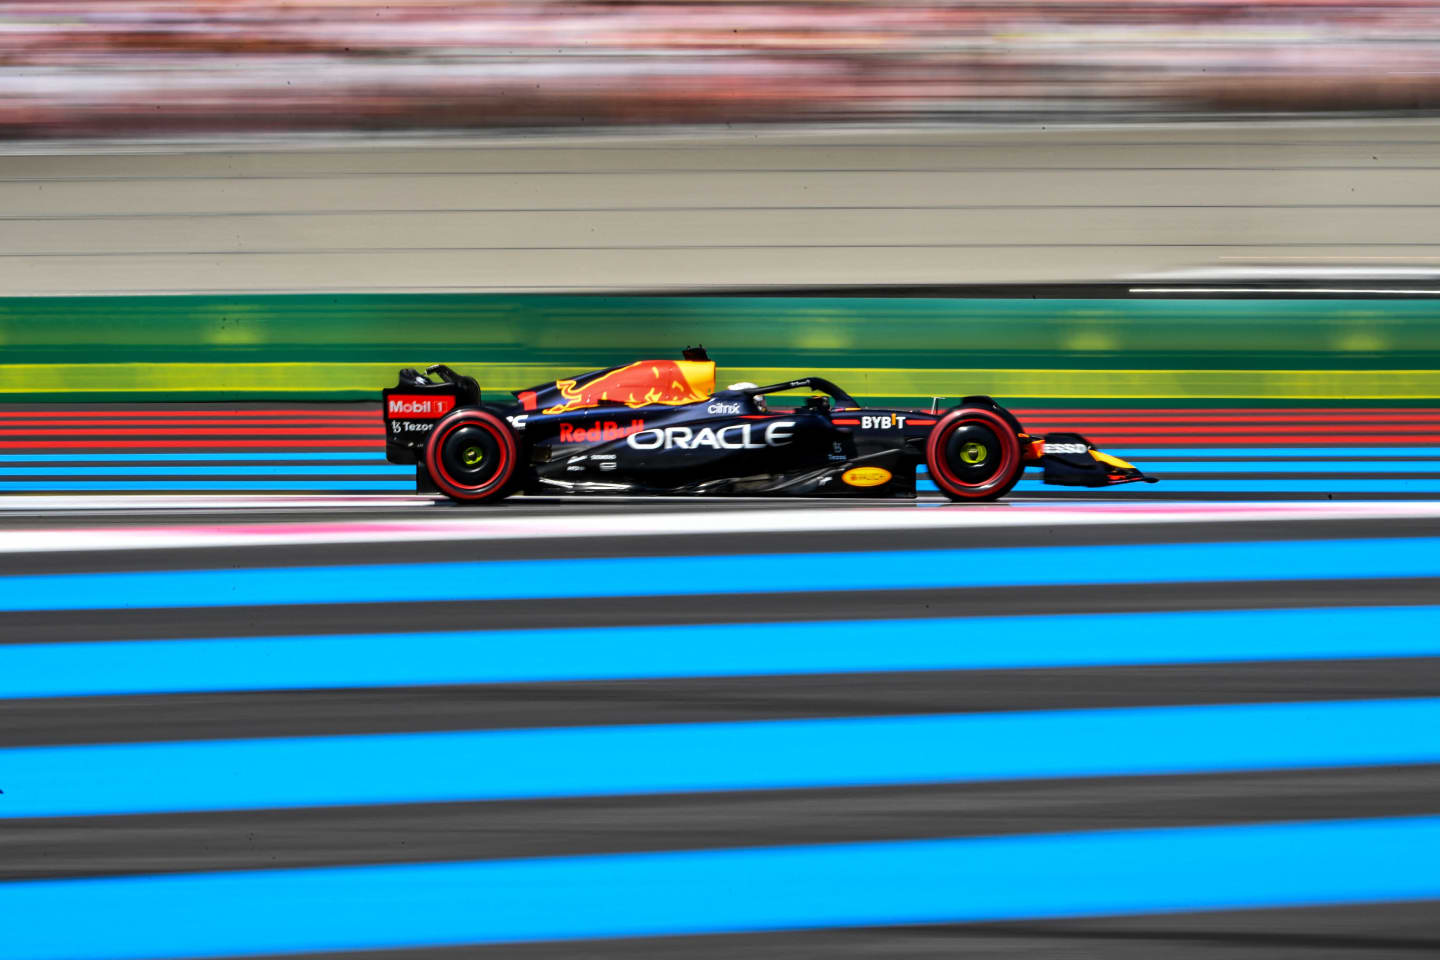 Red Bull Racing's Dutch driver Max Verstappen steers his car during the qualifying session ahead of the French Formula One Grand Prix at the Circuit Paul Ricard in Le Castellet, southern France, on July 23, 2022. (Photo by Sylvain THOMAS / AFP) (Photo by SYLVAIN THOMAS/AFP via Getty Images)